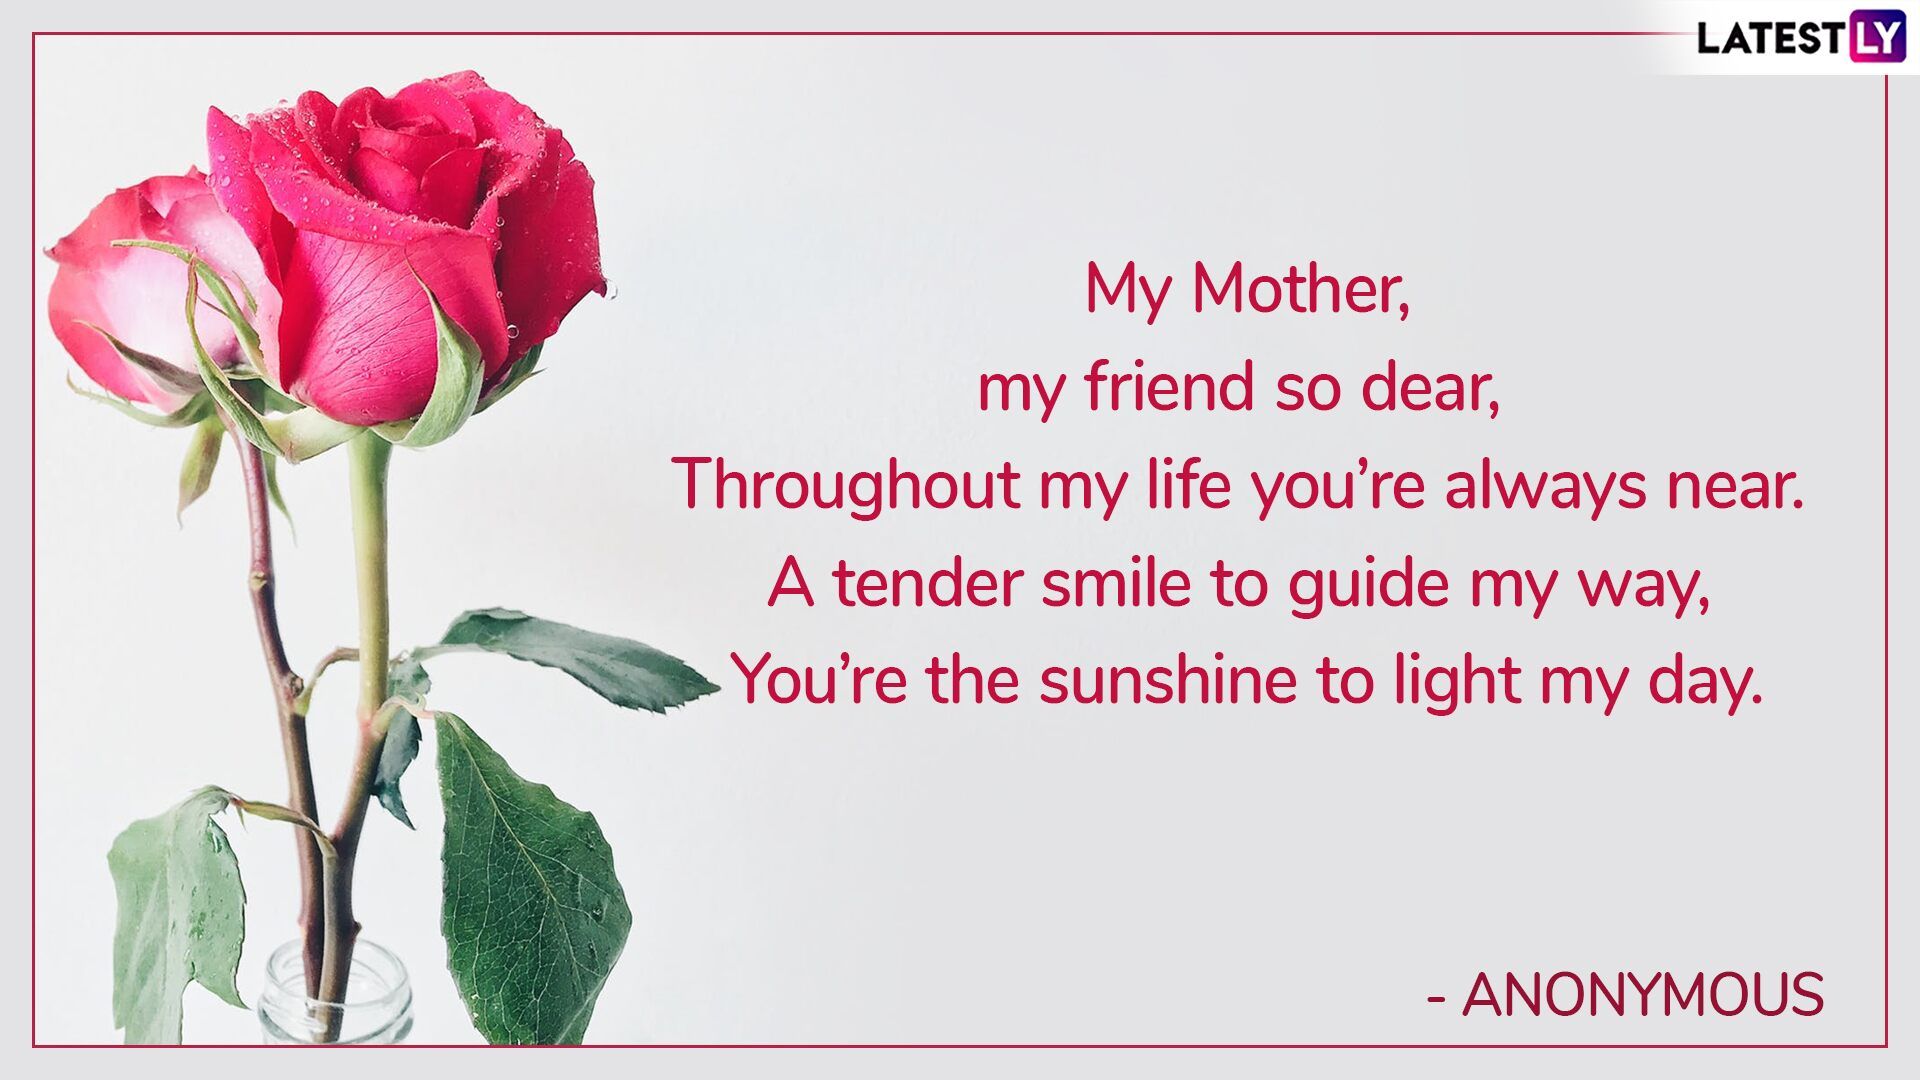 Mother's Day 2019 Poems & Image: WhatsApp Stickers, Quotes, GIF